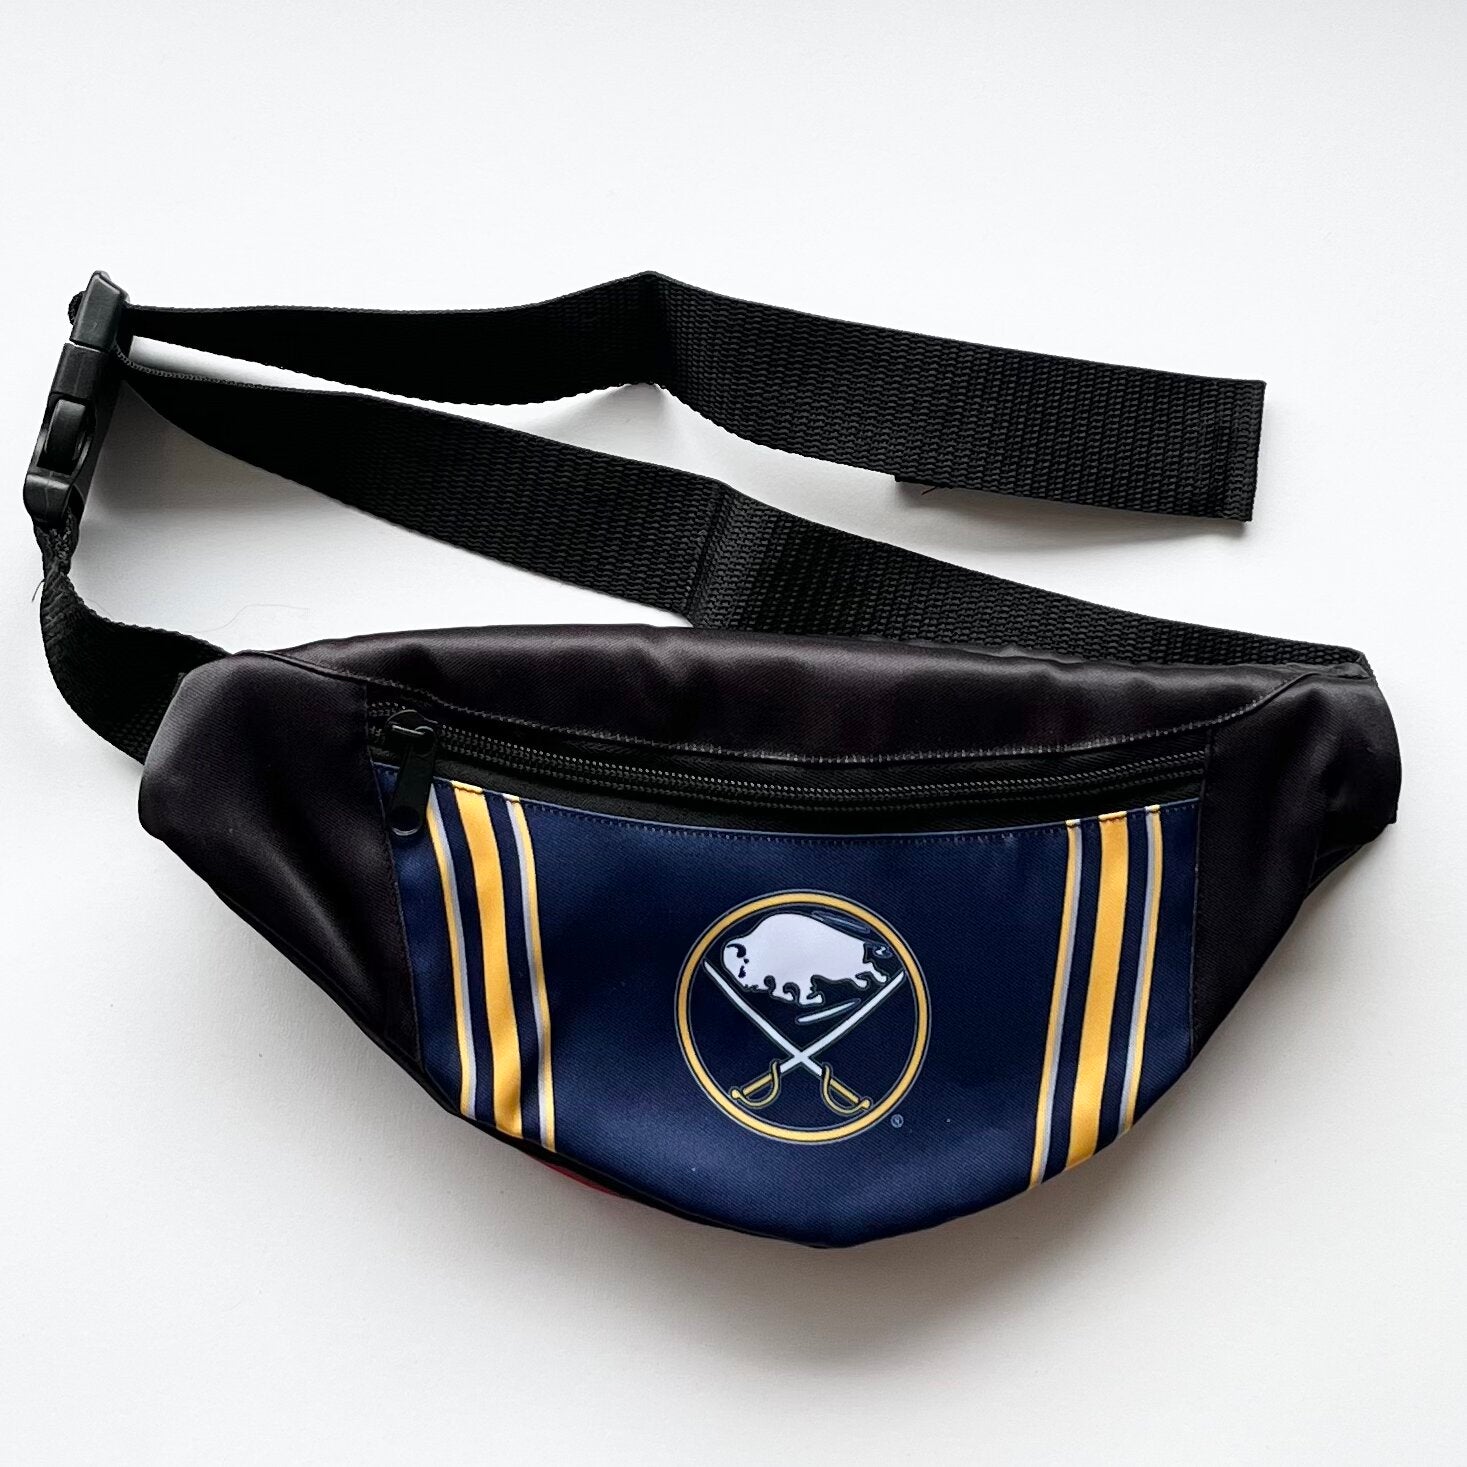 Officially Licensed NHL Fanny Pack - Buffalo Sabres